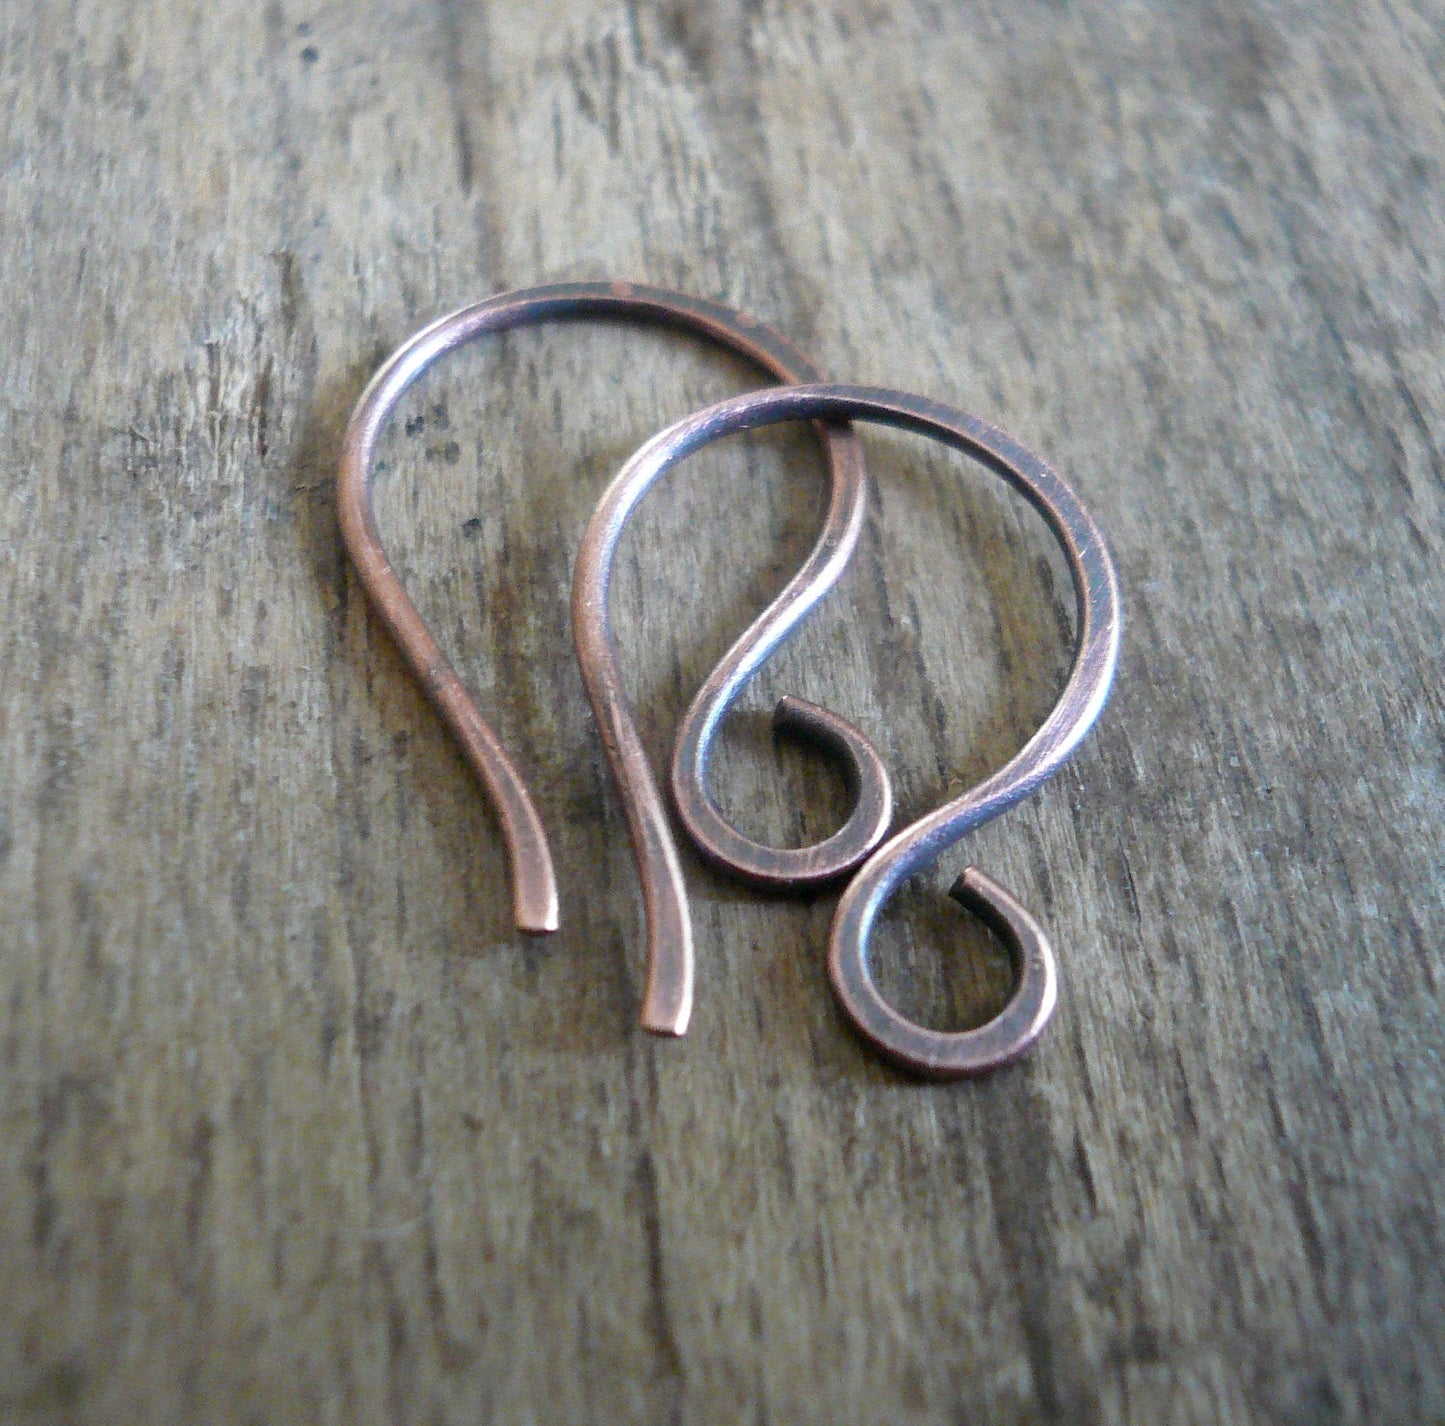 Twinkle Antique Copper Earwires - Handmade. Handforged. Oxidized.